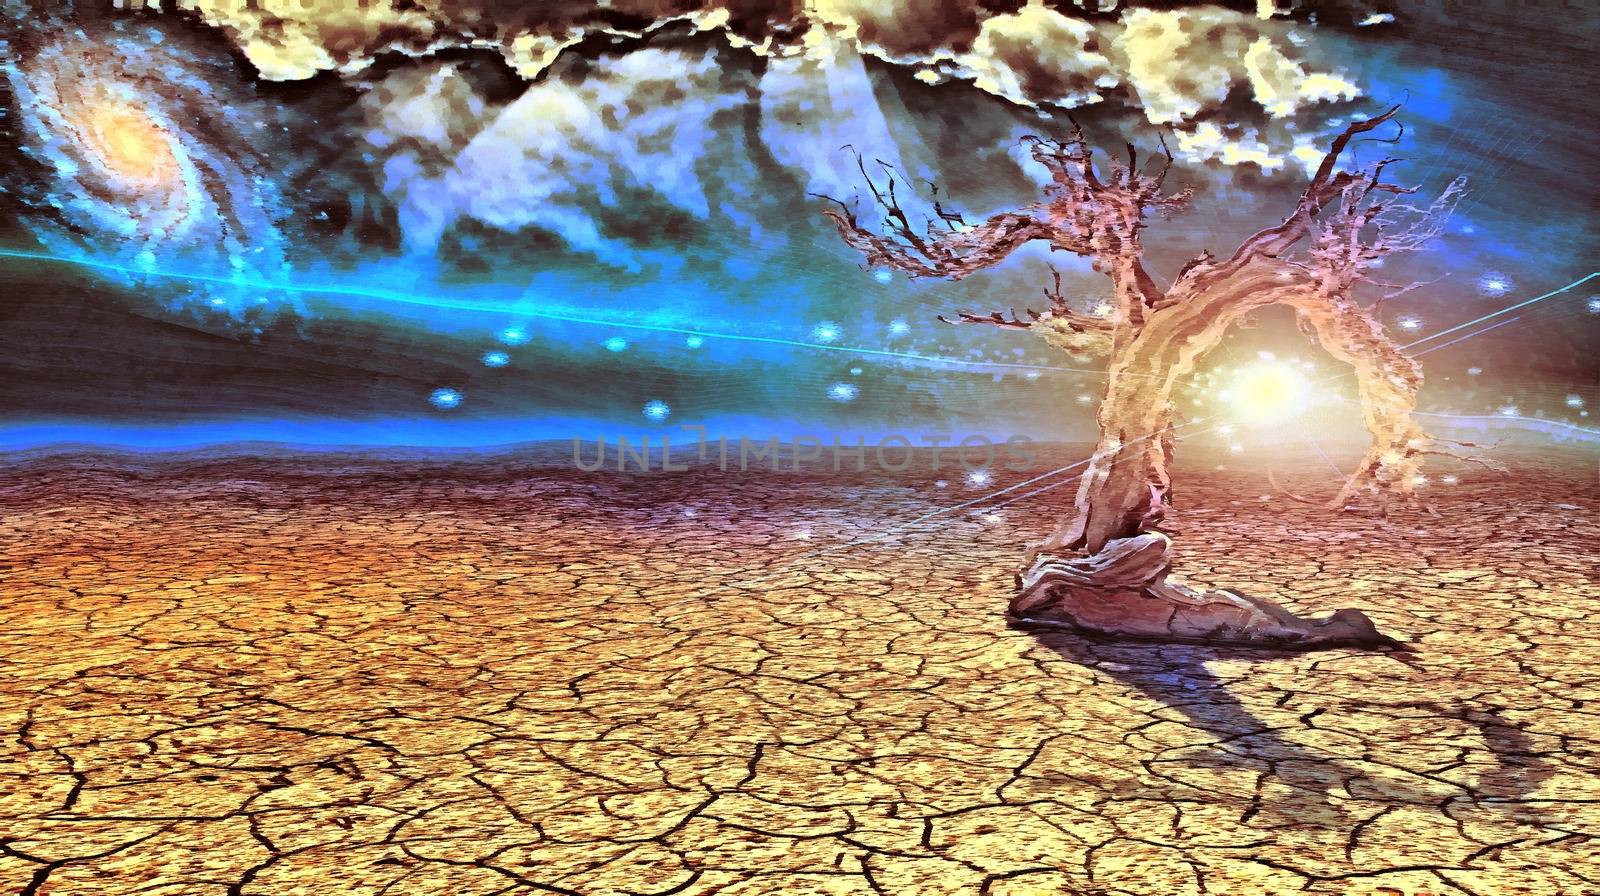 Surreal painting. Old dry tree in arid land. Sunset or sunrise